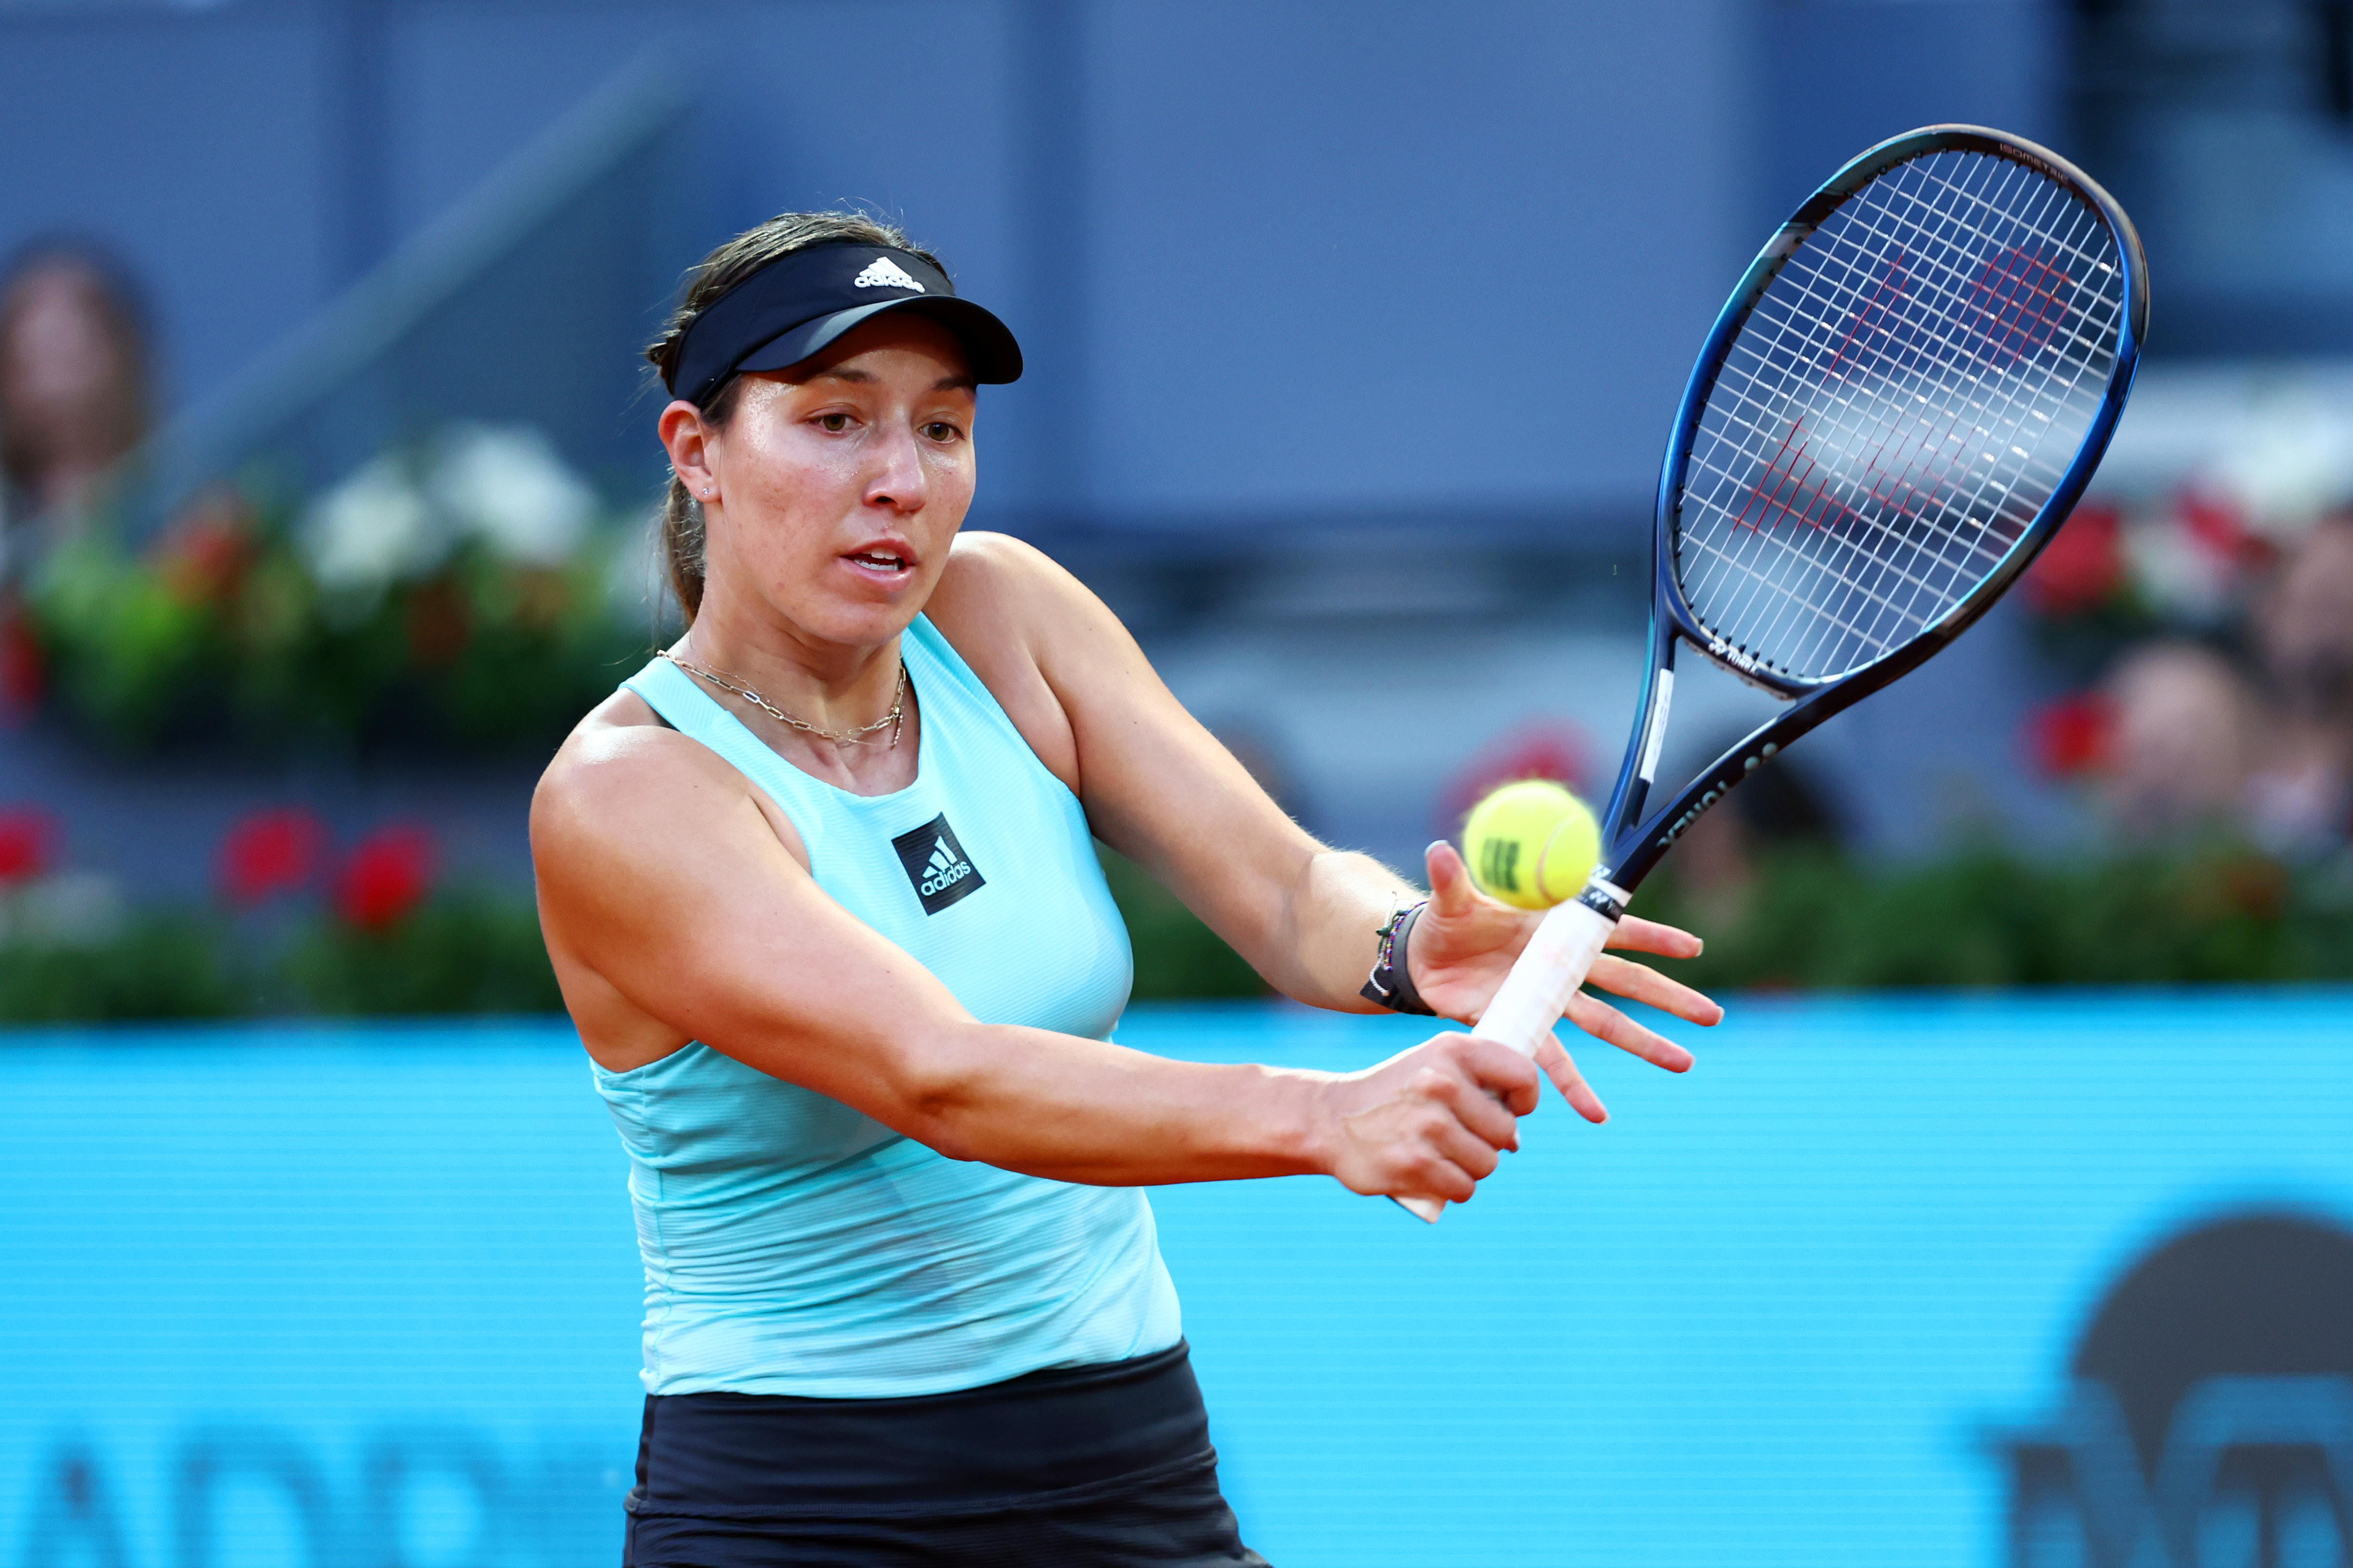 Jessica Pegula solves Sara Sorribes Tormo, continues elite ascent with Madrid semifinal